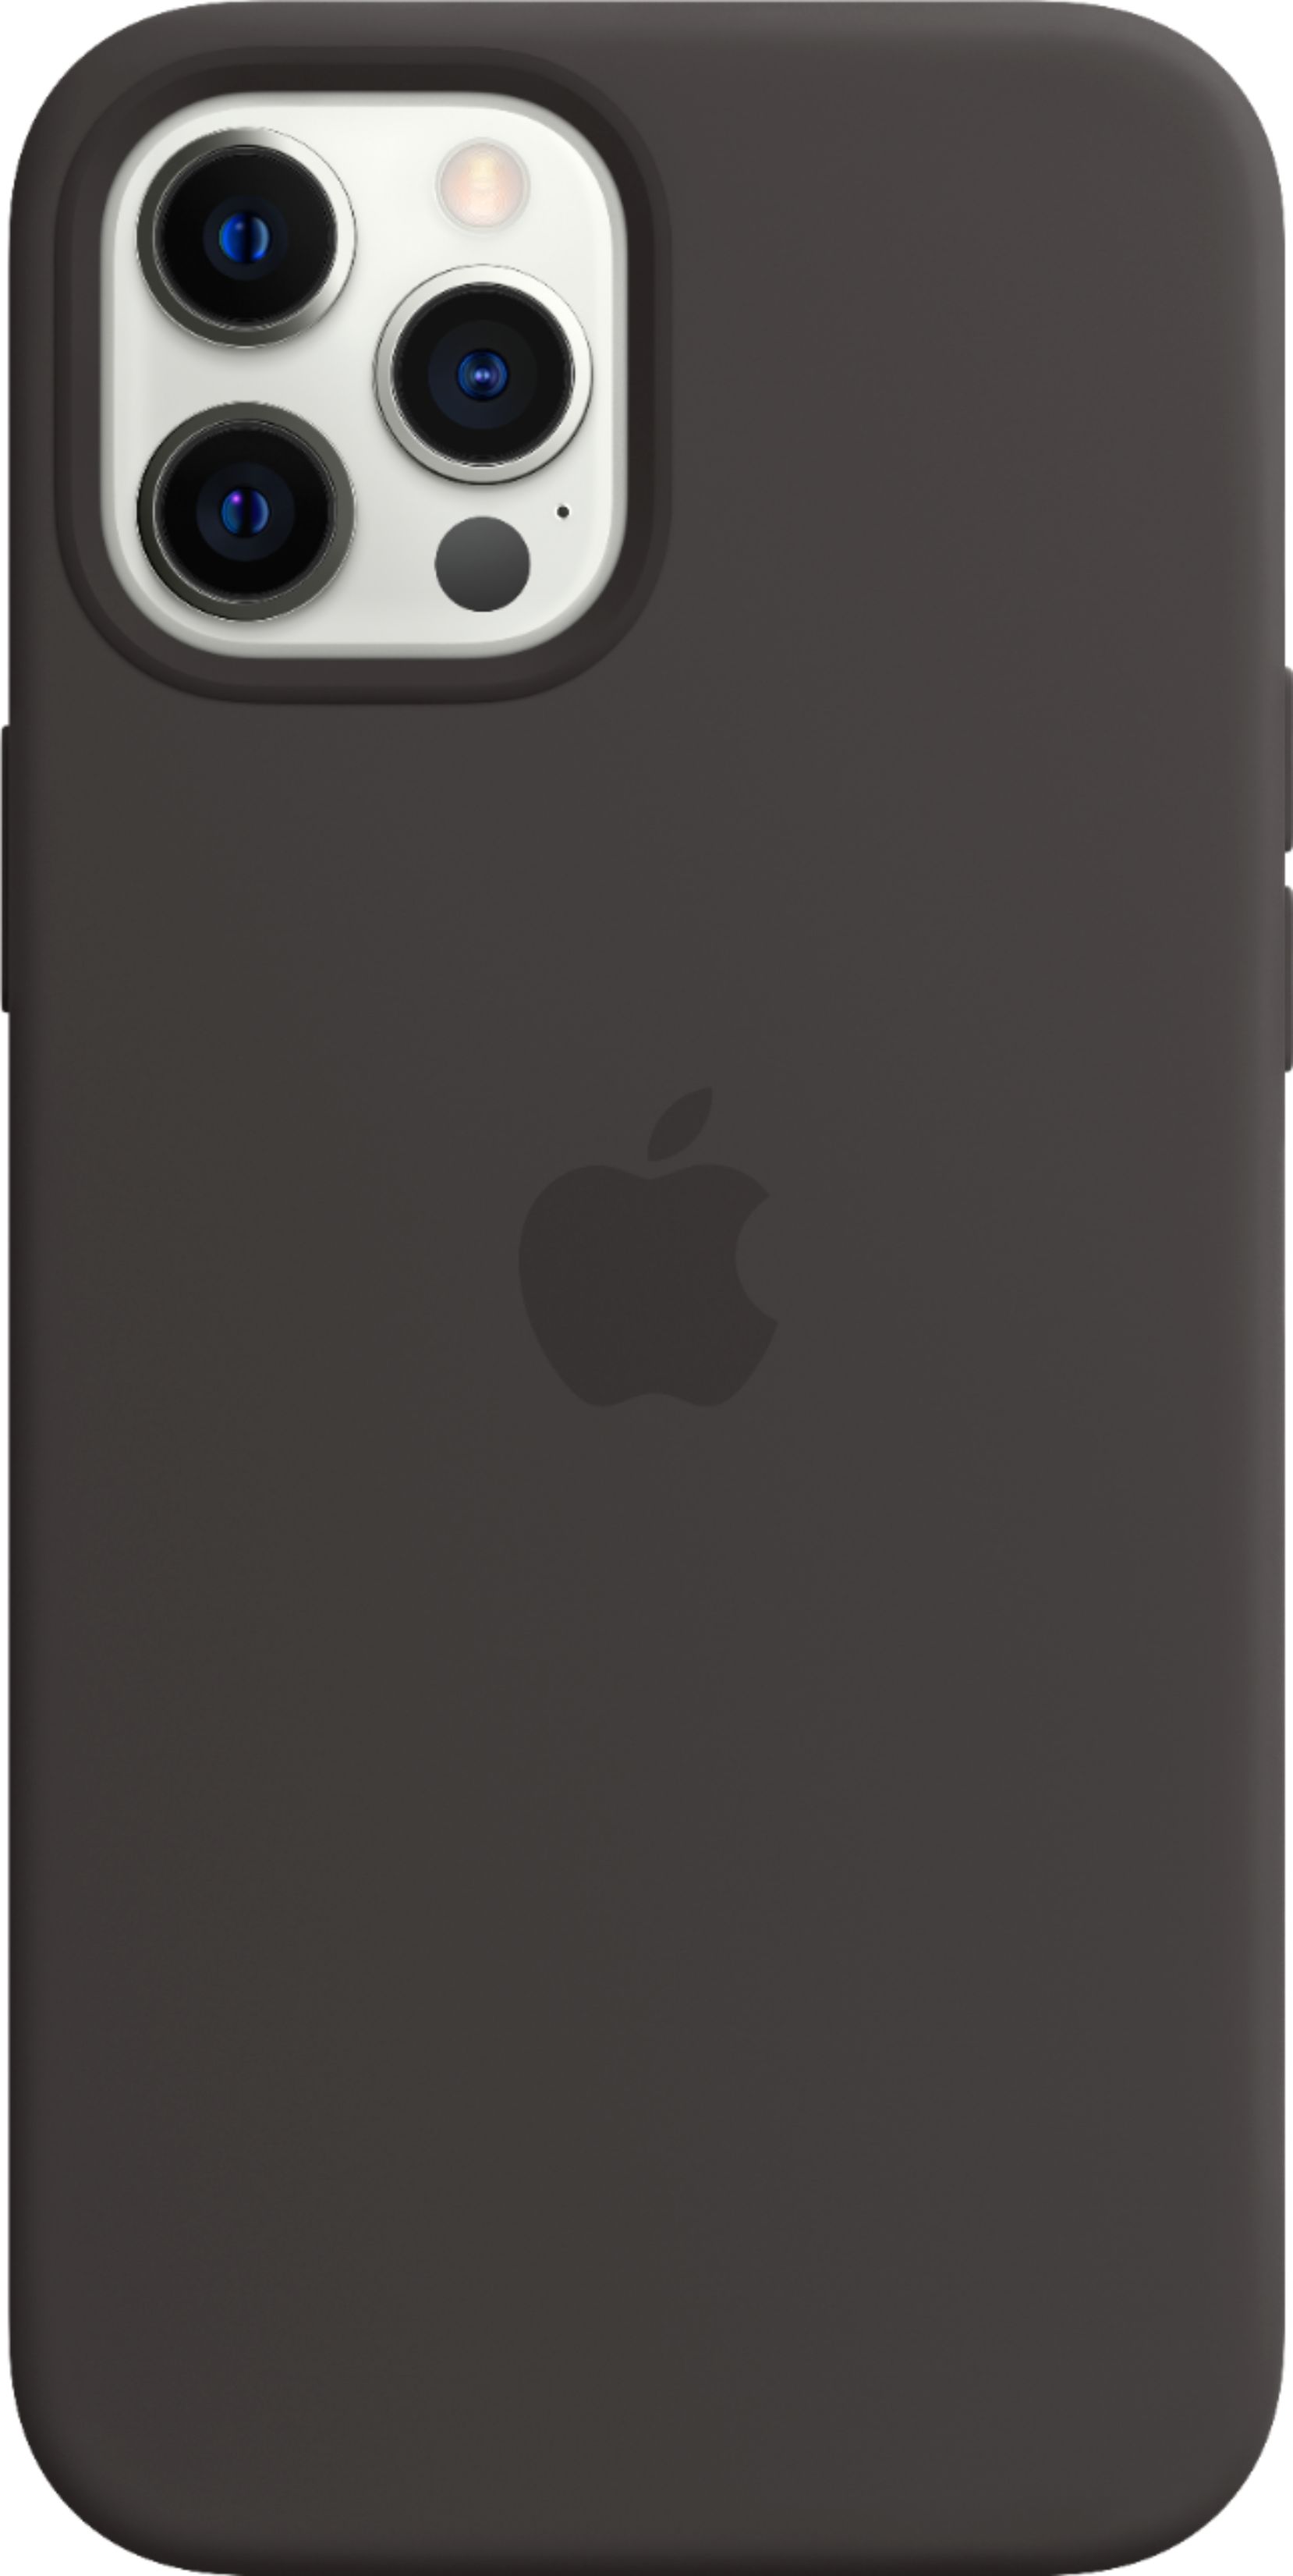 Iphone 12 Pro Case Store, 59% OFF | www.hcb.cat